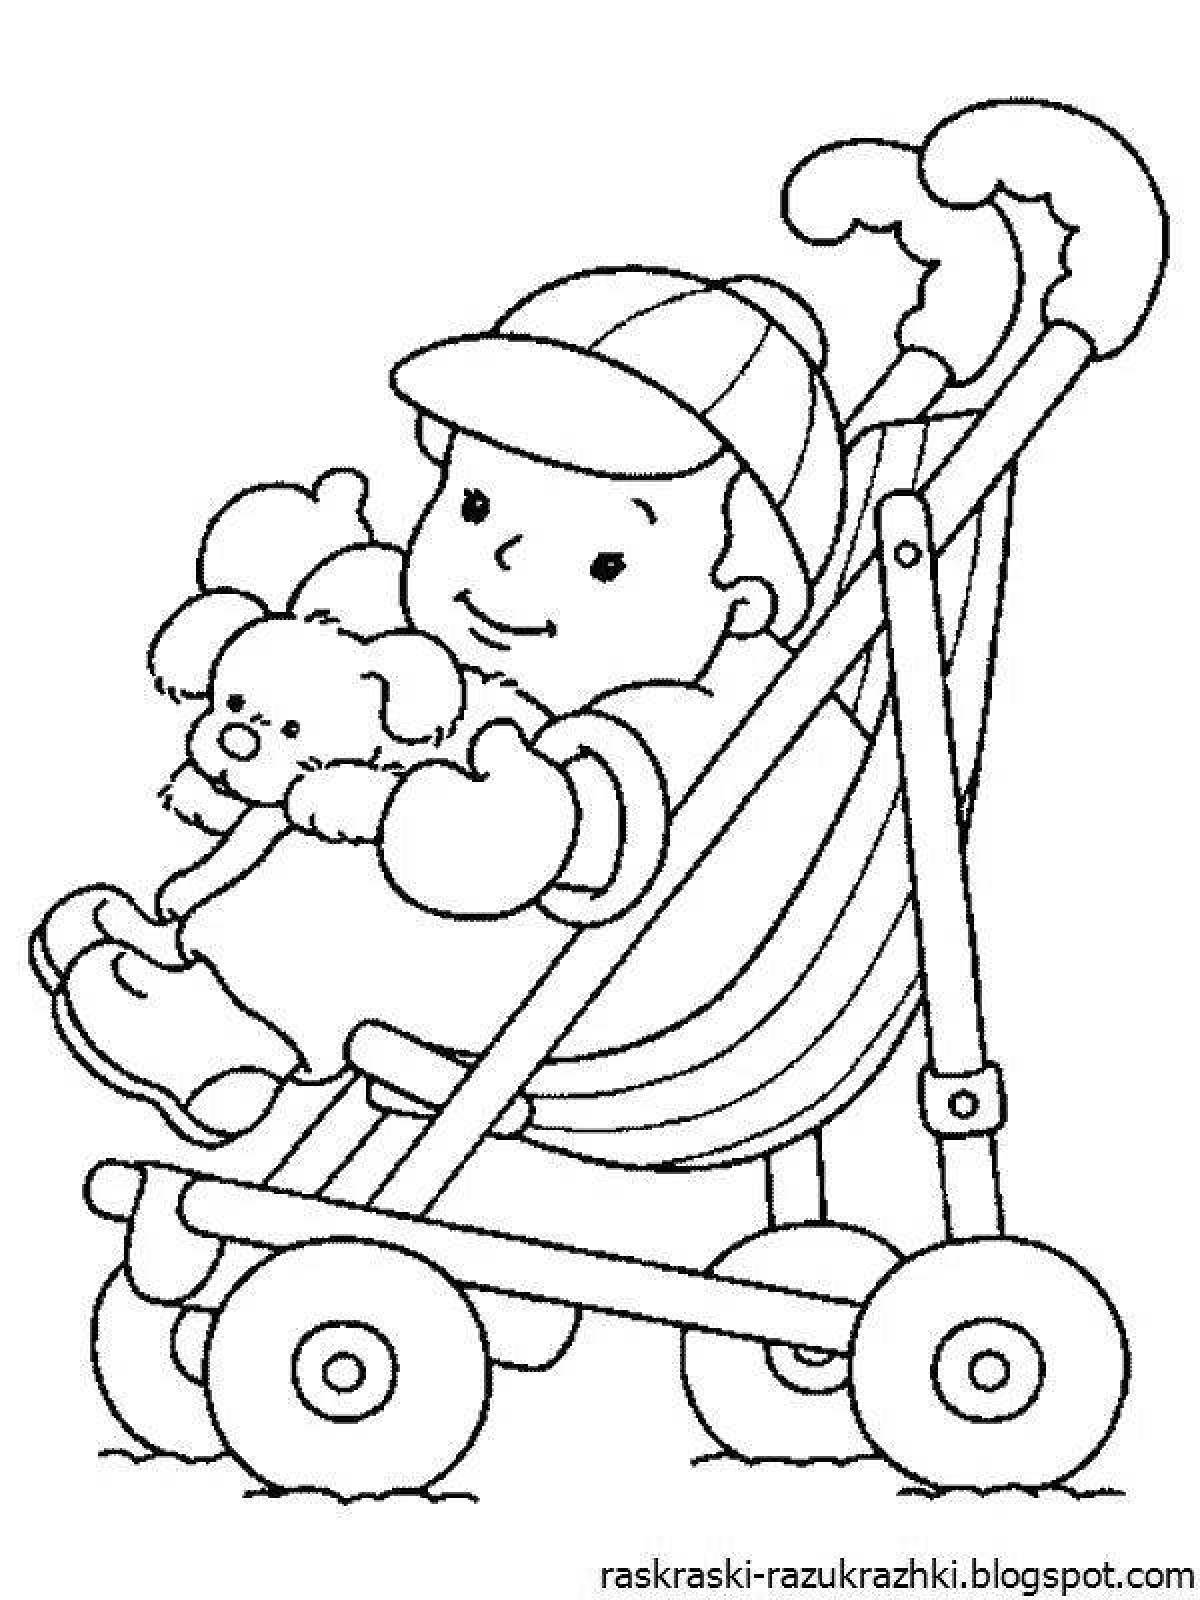 A fun coloring book for kids baby